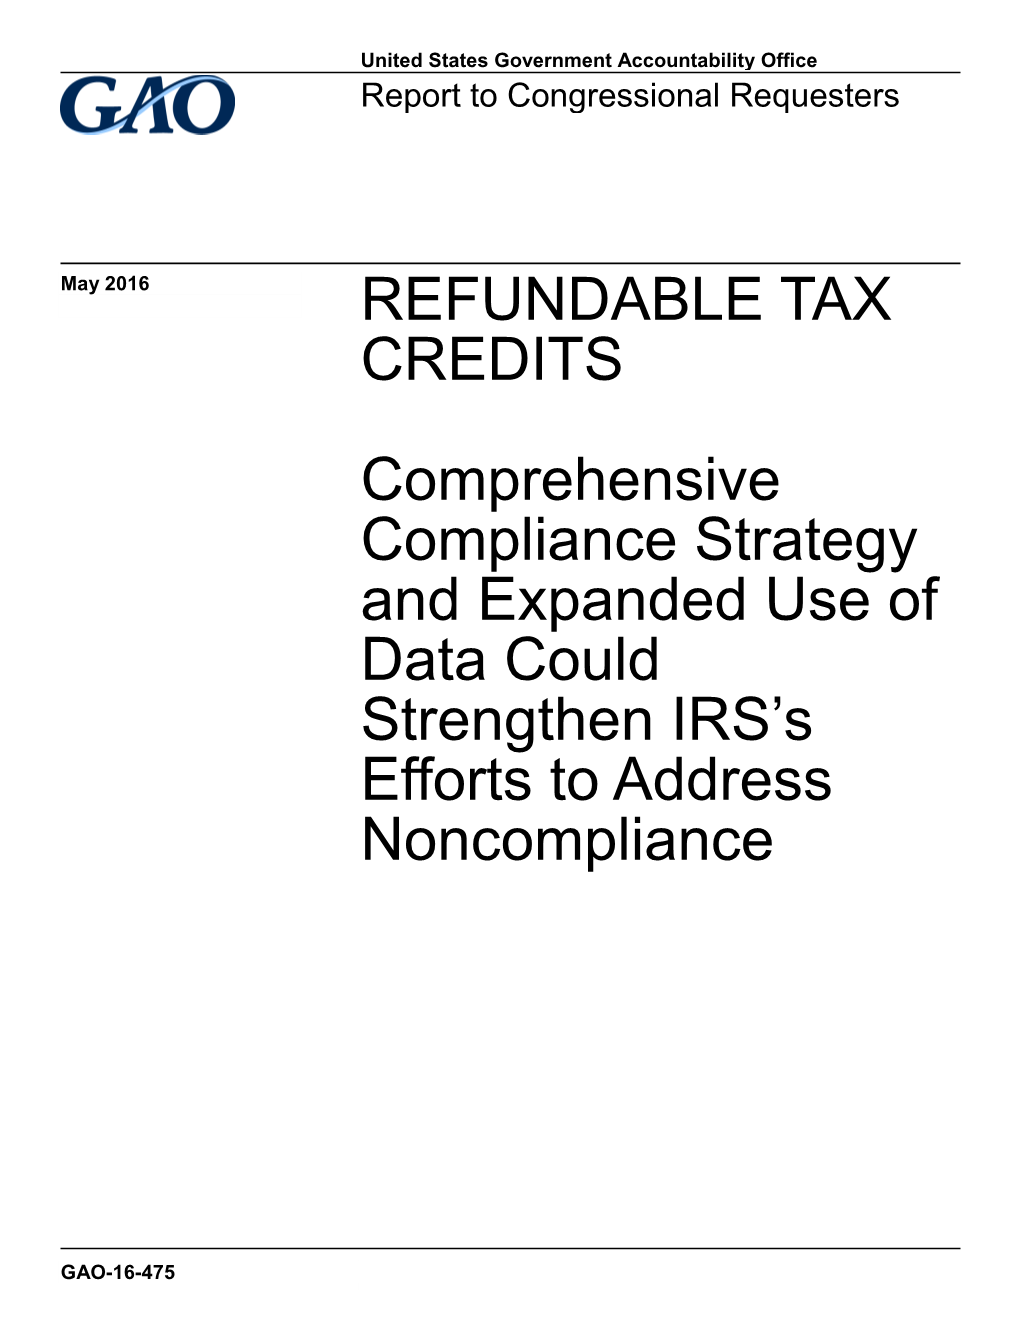 GAO-16-475, Refundable Tax Credits: Comprehensive Compliance Strategy and Expanded Uso of Data Could Strengthen IRS's Effort